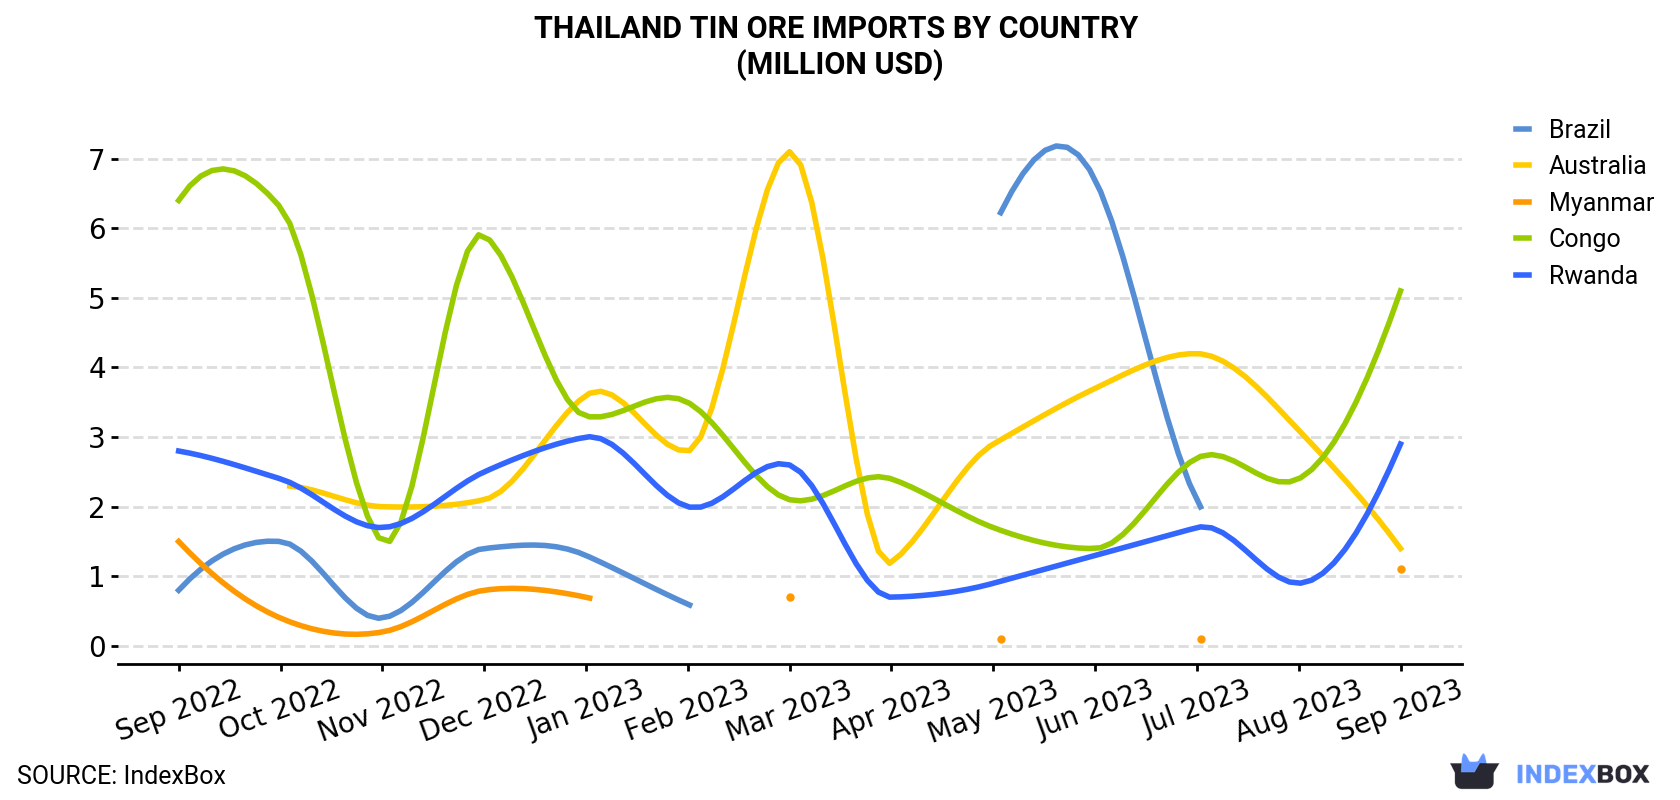 Thailand Tin Ore Imports By Country (Million USD)